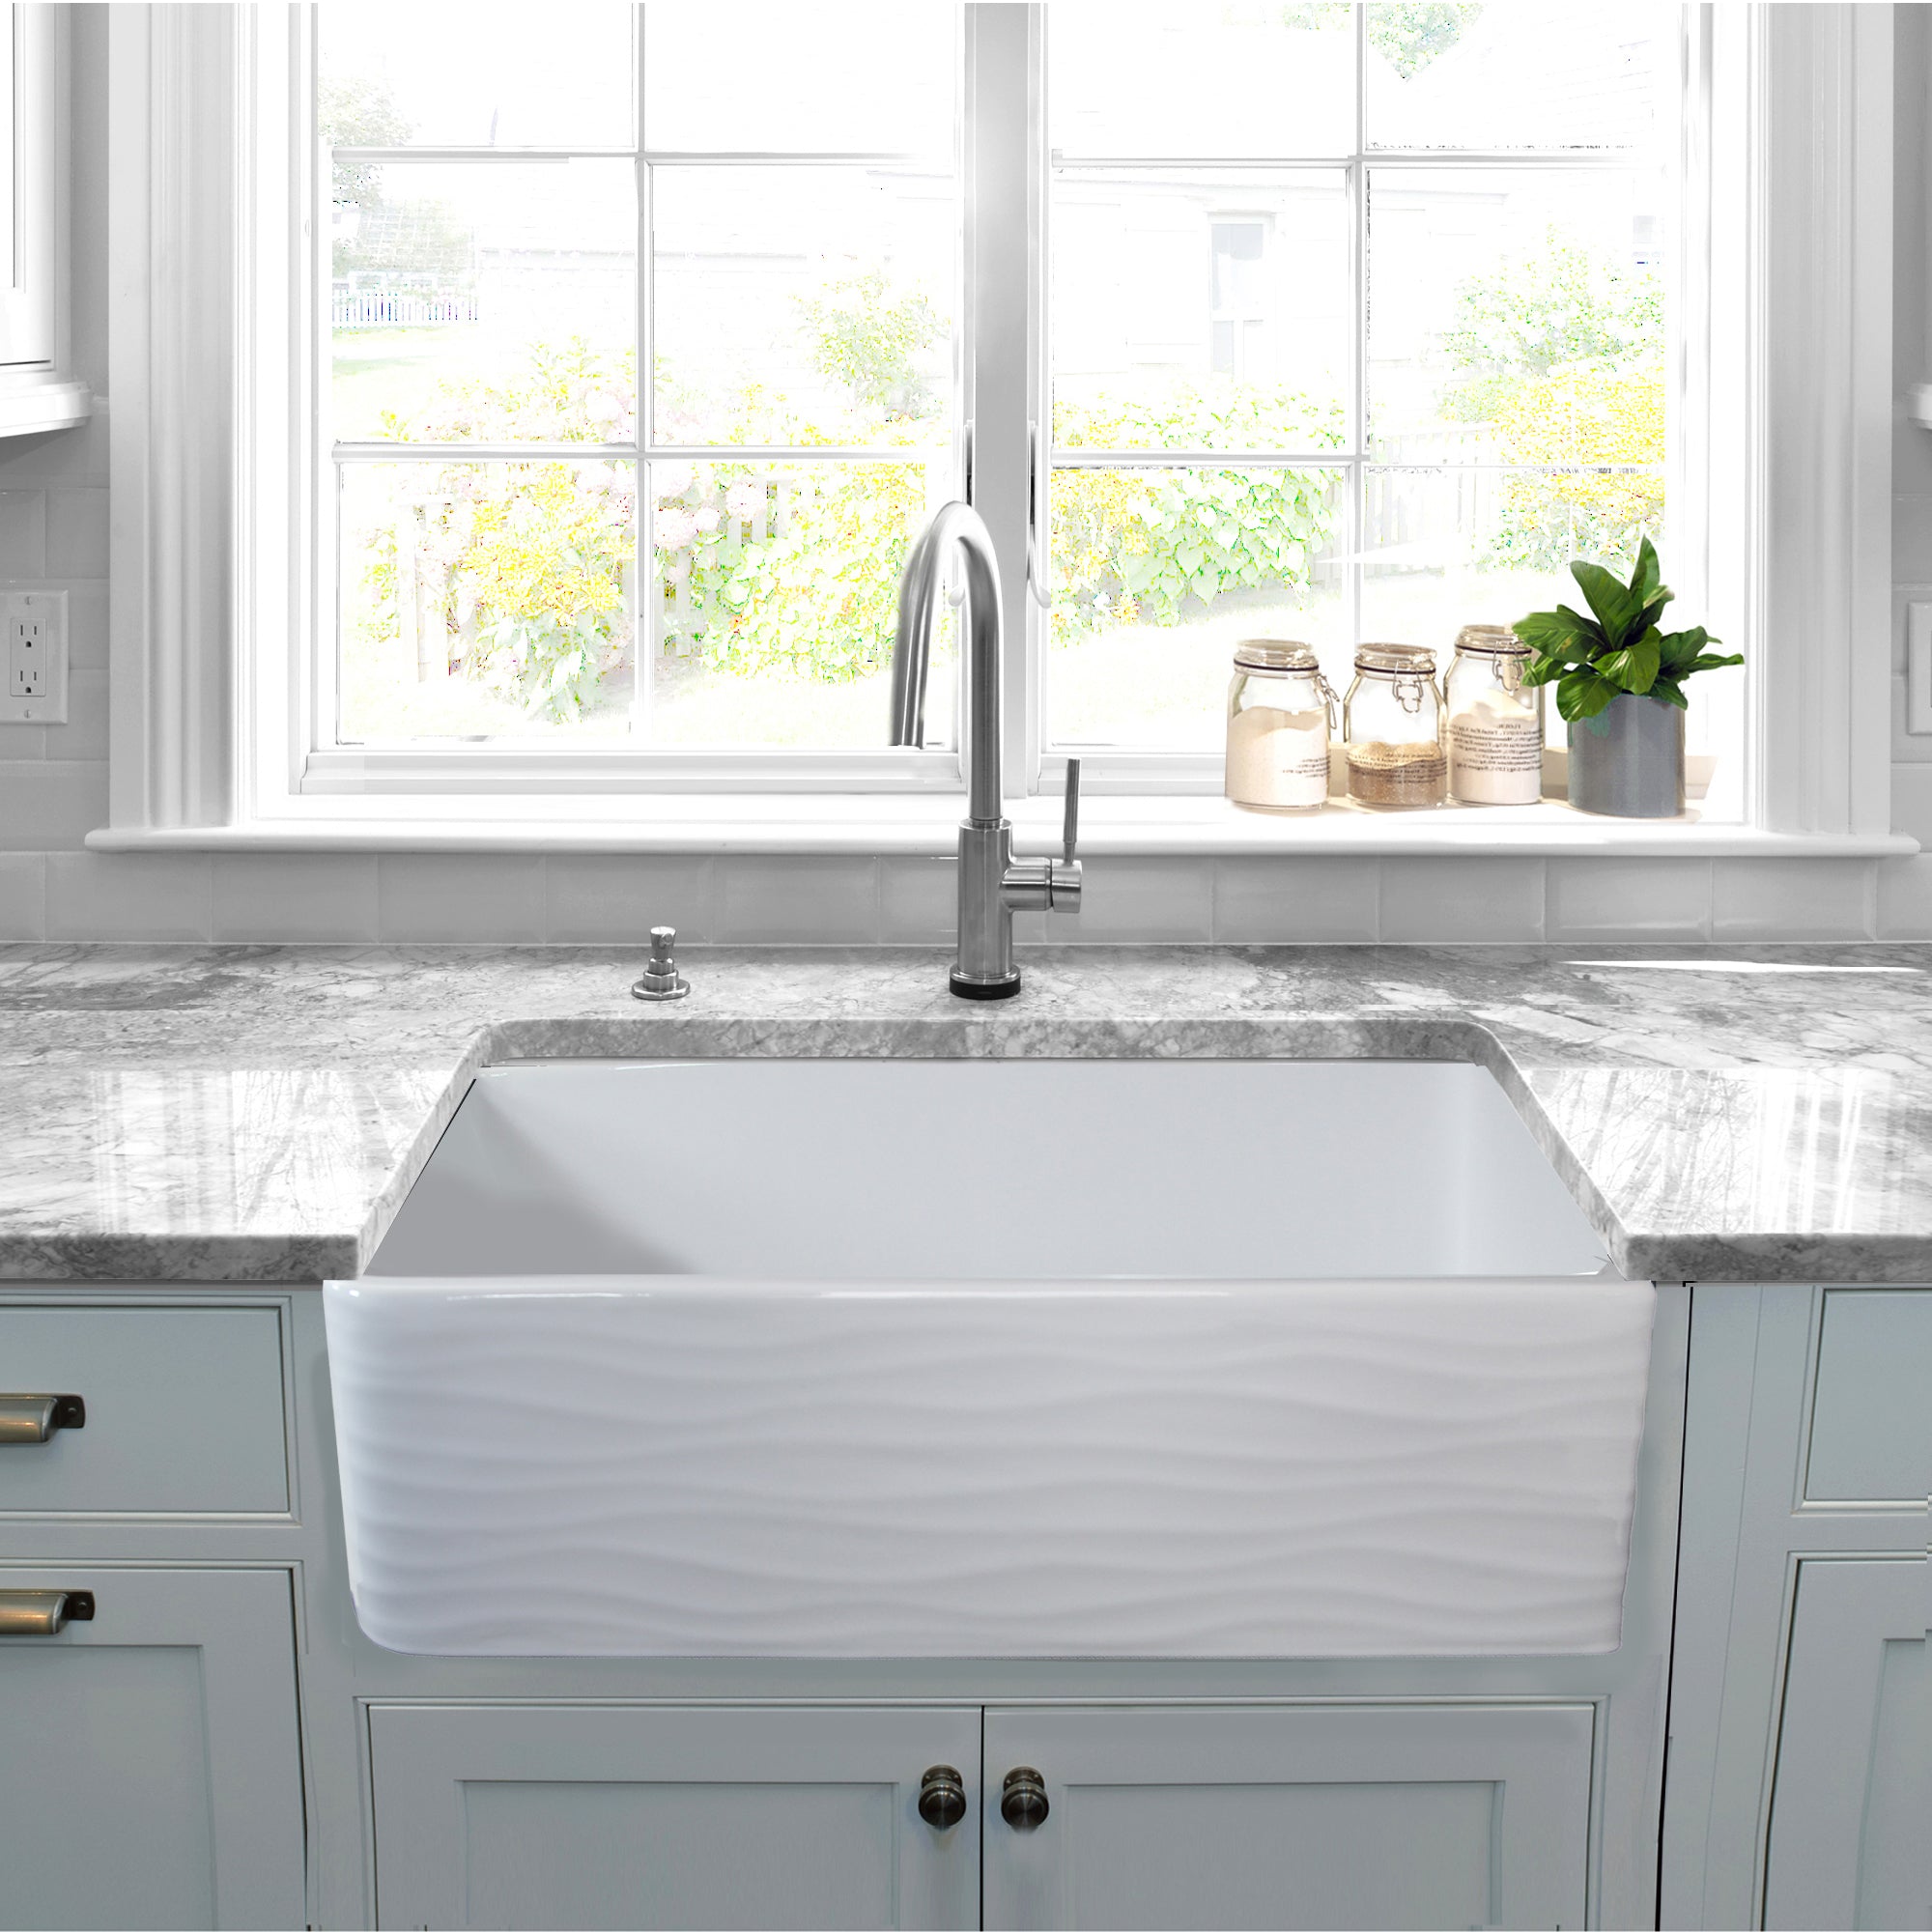 Nantucket Sinks 33" Farmhouse Fireclay Sink with Waves Apron